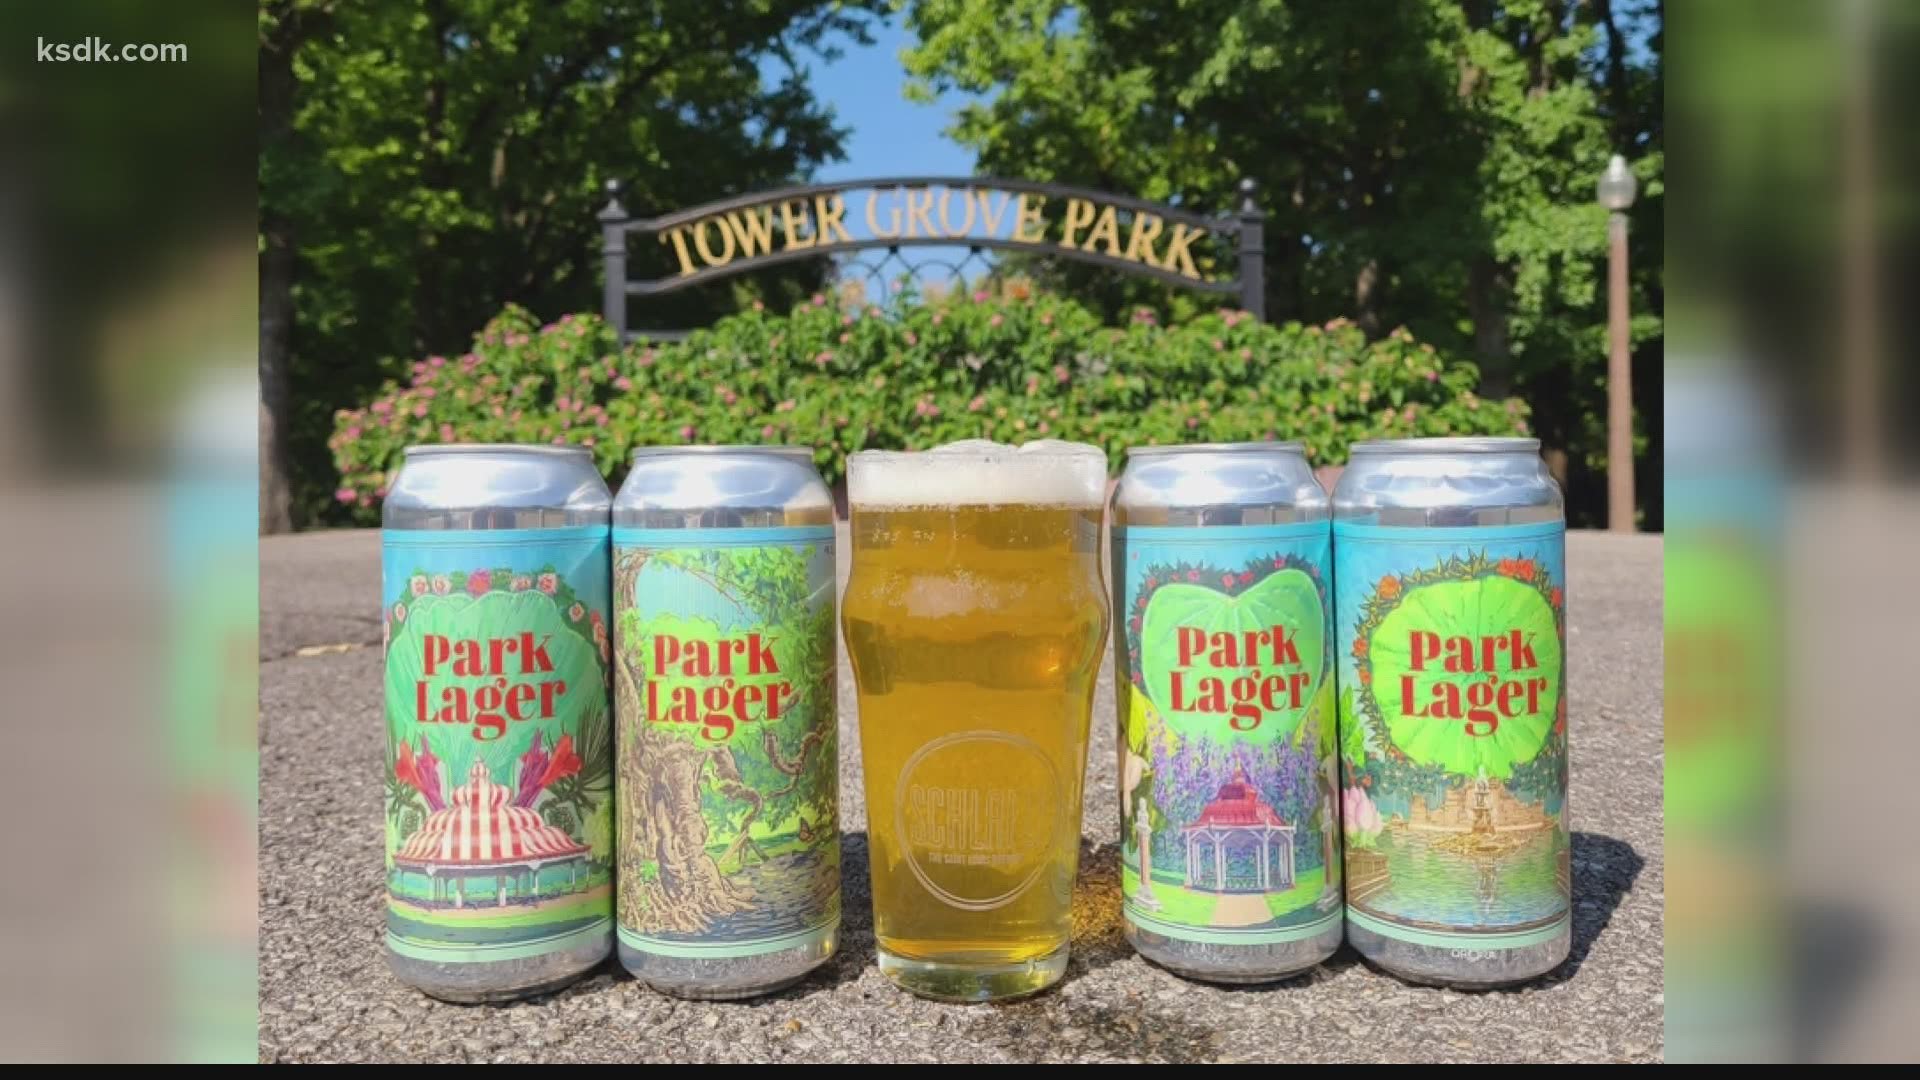 Park Lager is available for $7.99 in 4-pack, 16-ounce cans at select locations in the St. Louis area